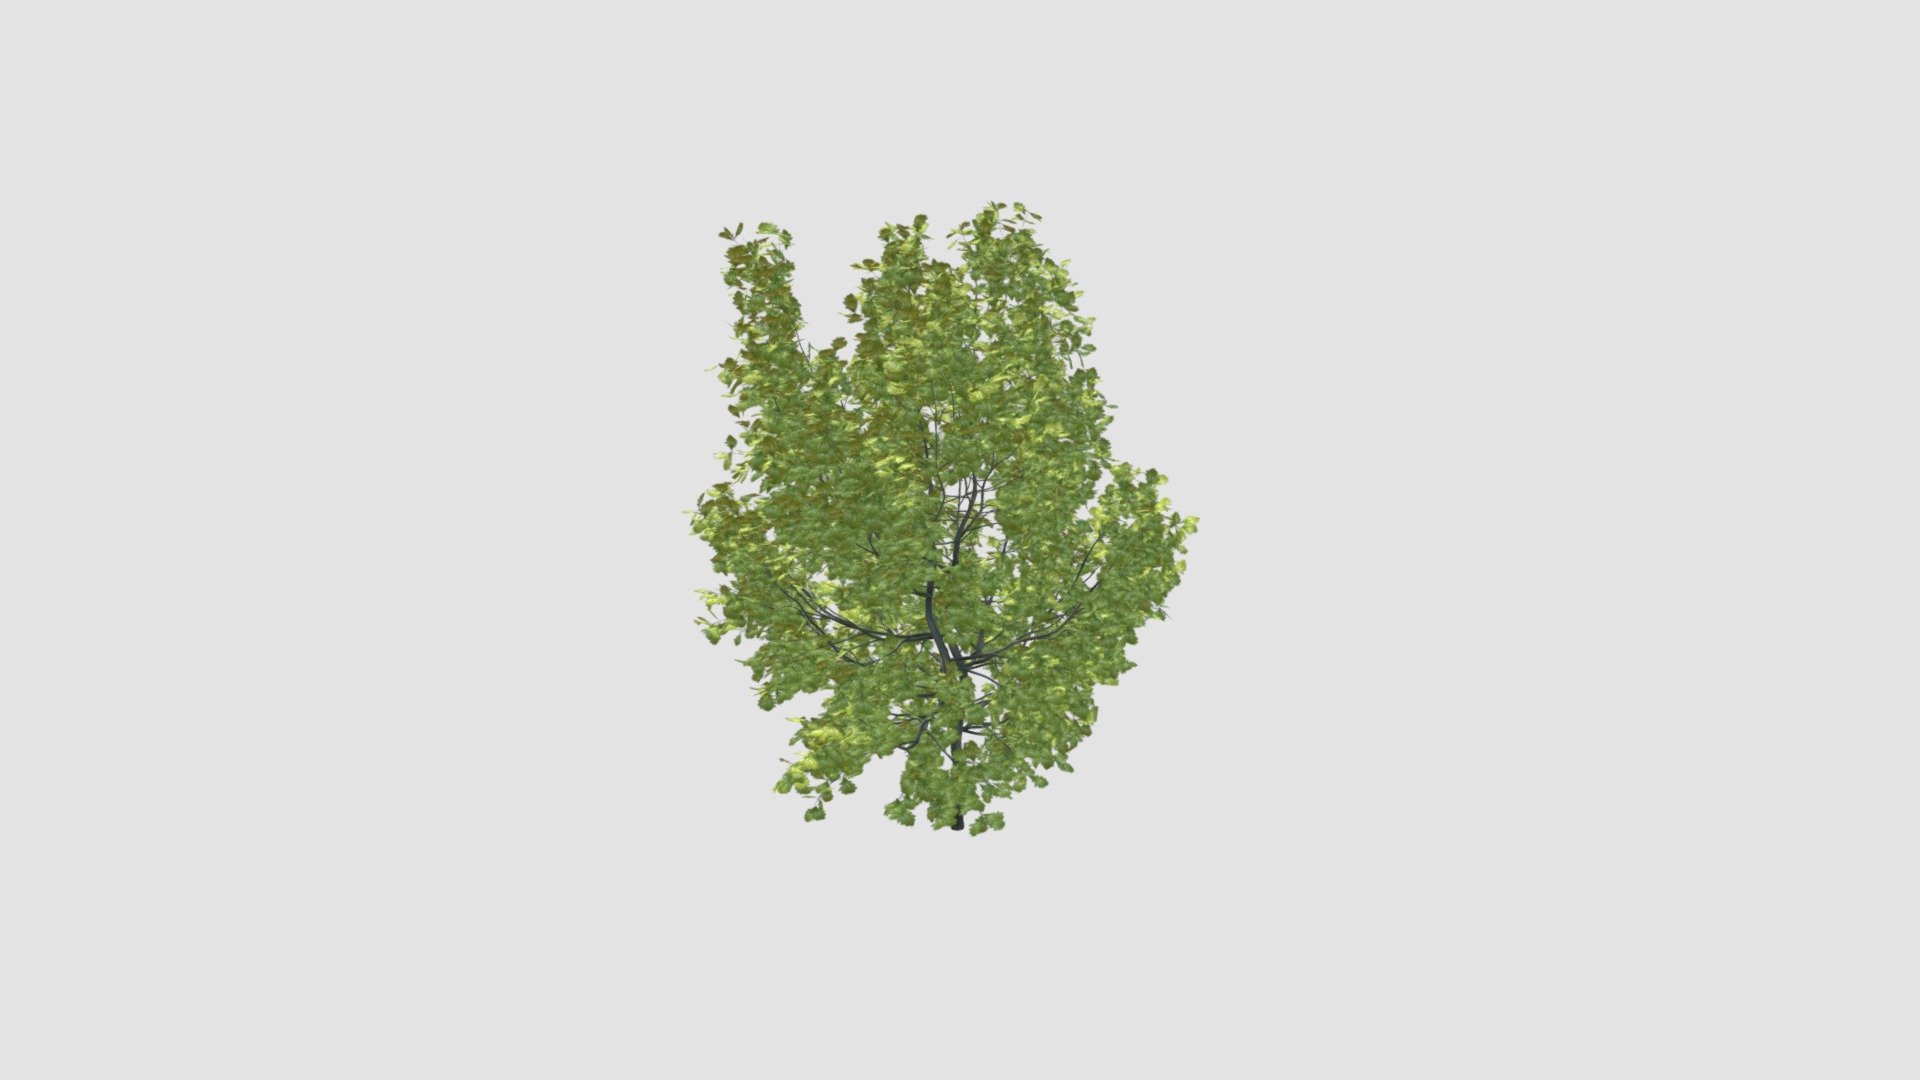 Highly detailed 3d model of tree with all textures, shaders and materials. It is ready to use, just put it into your scene 3d model